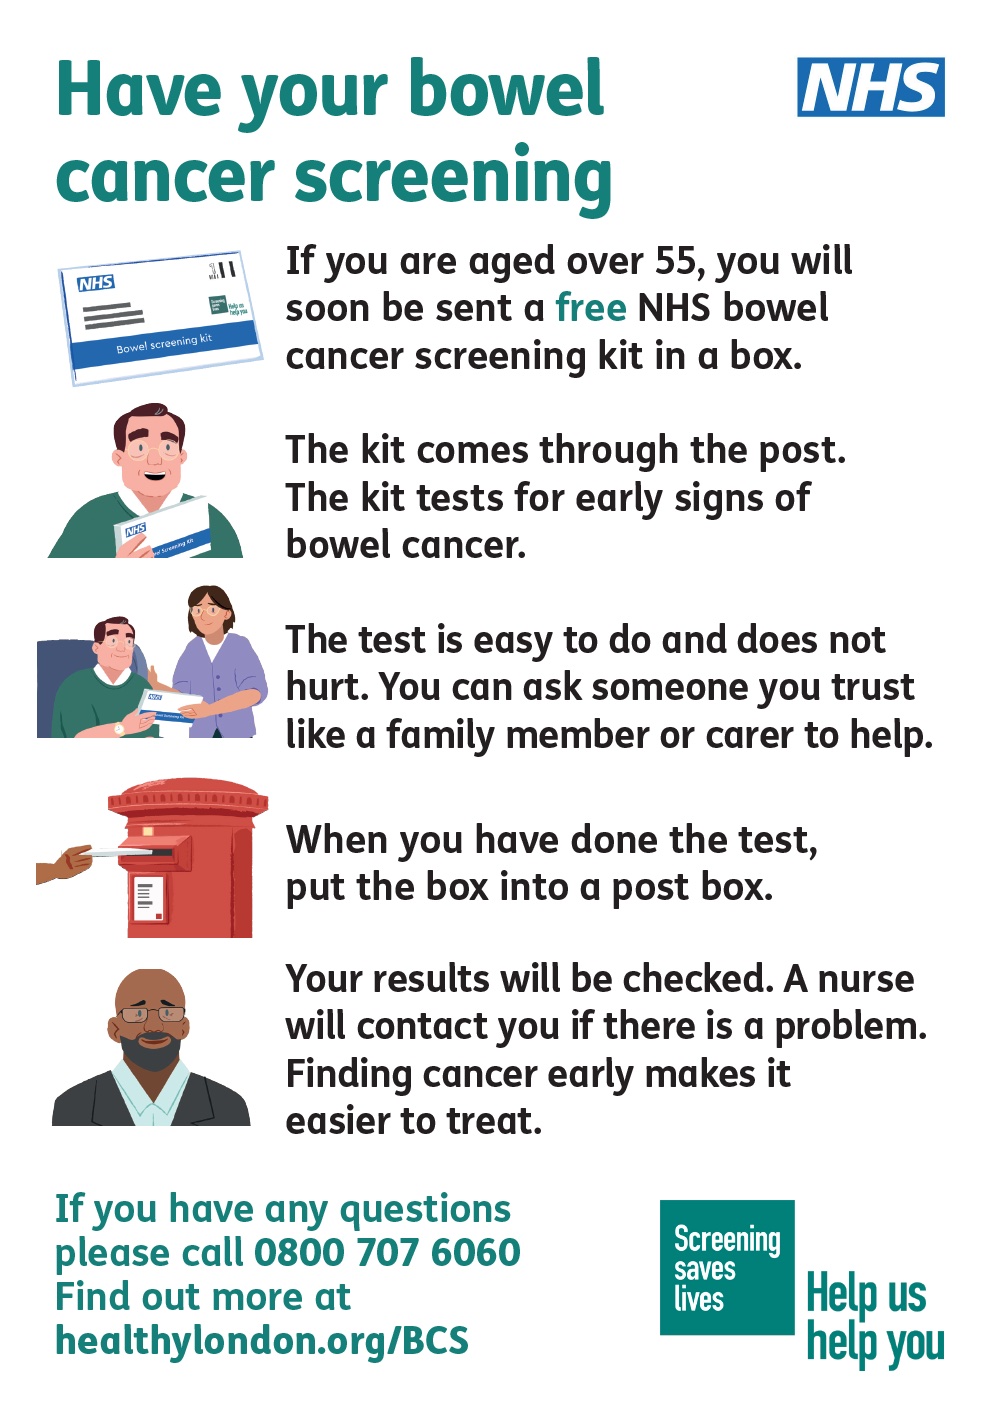 NHS Poster about bowel cancer screening.